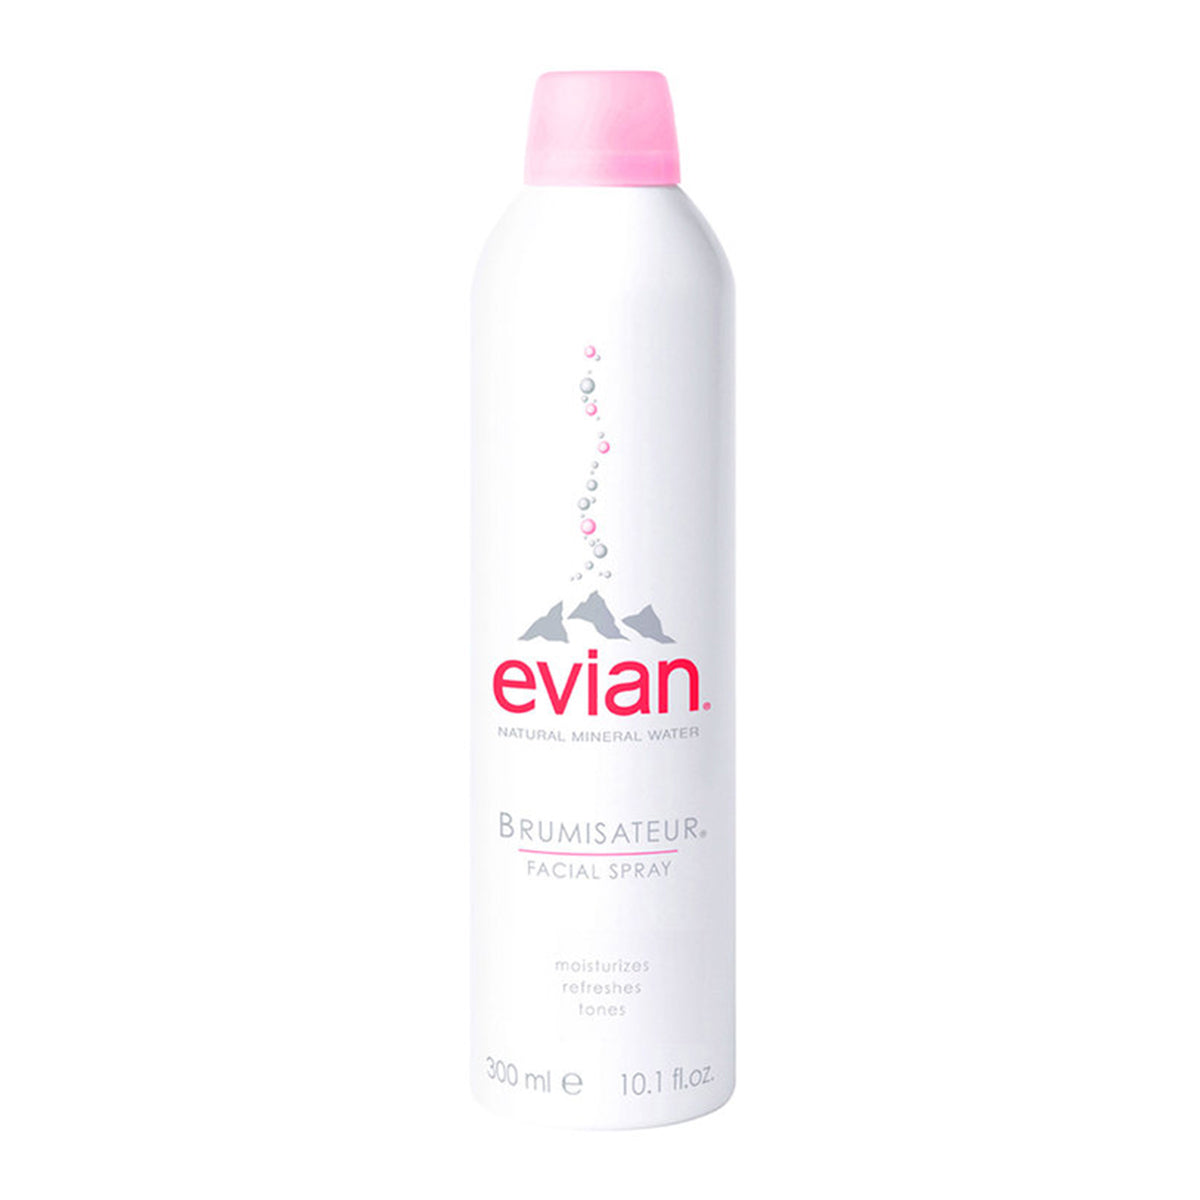 Primary image of Evian Mineral Water Spray